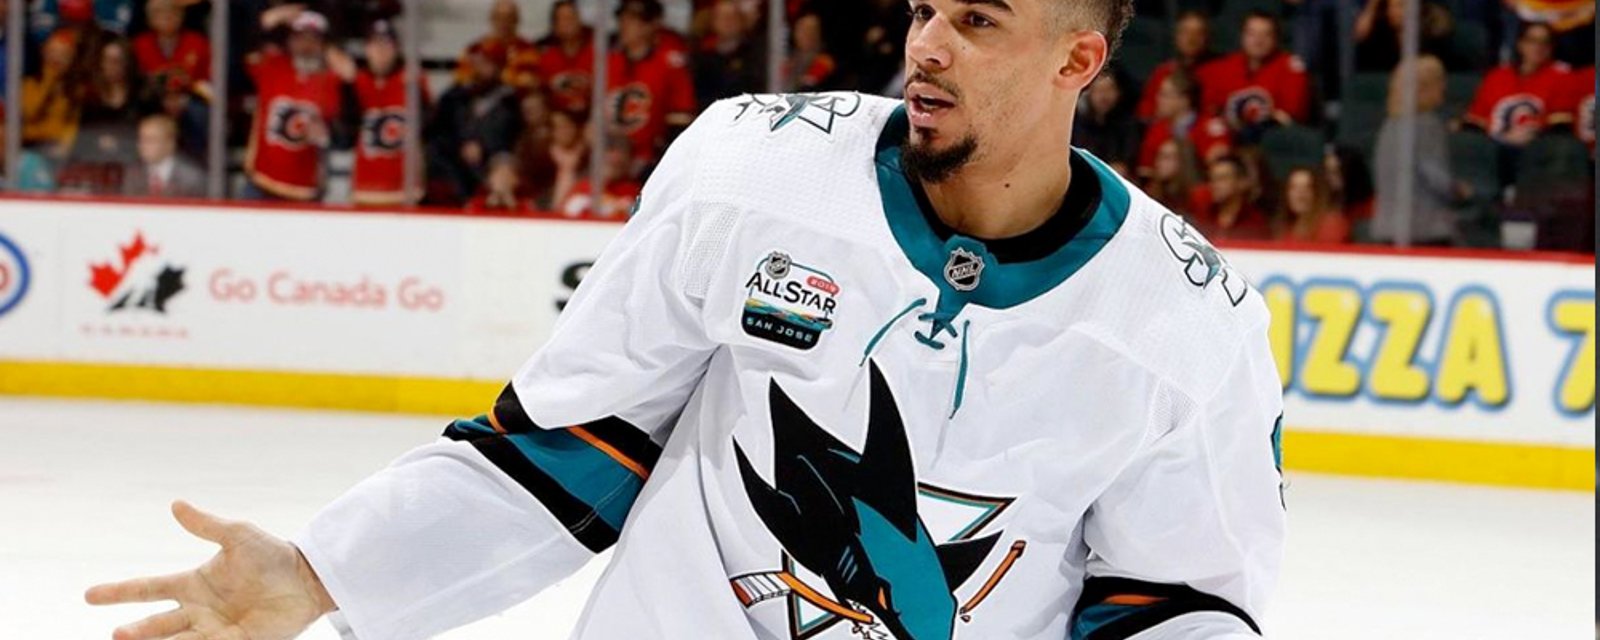 Court documents show that the Sharks could be done with Evander Kane